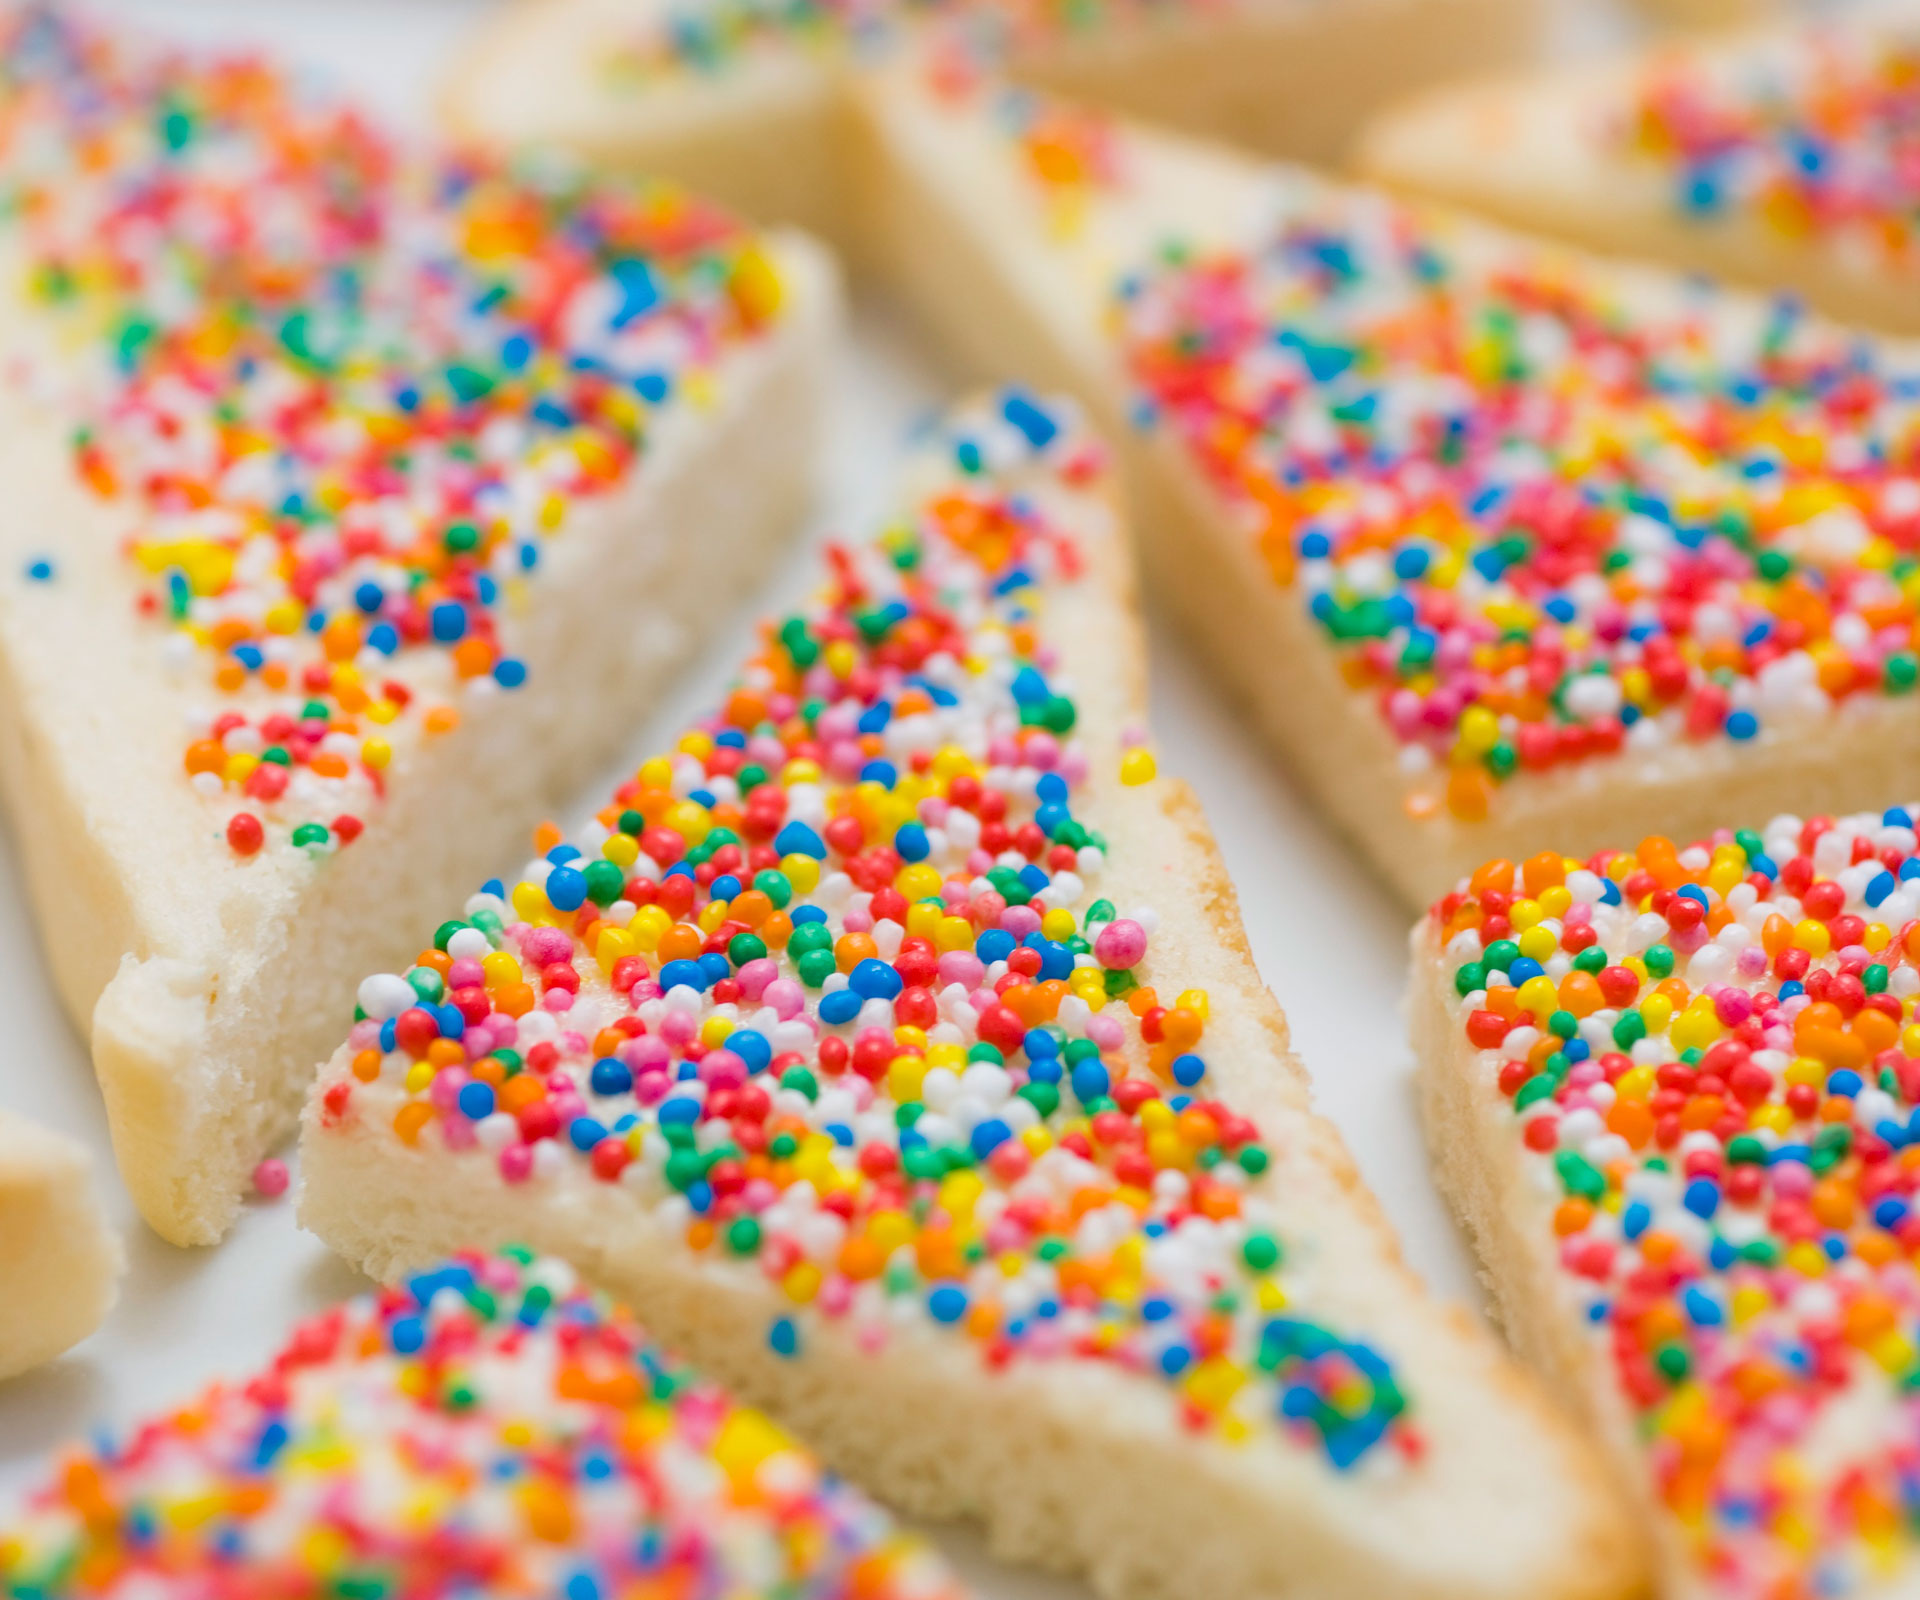 US fairy bread story shows how much Australia confuses Americans